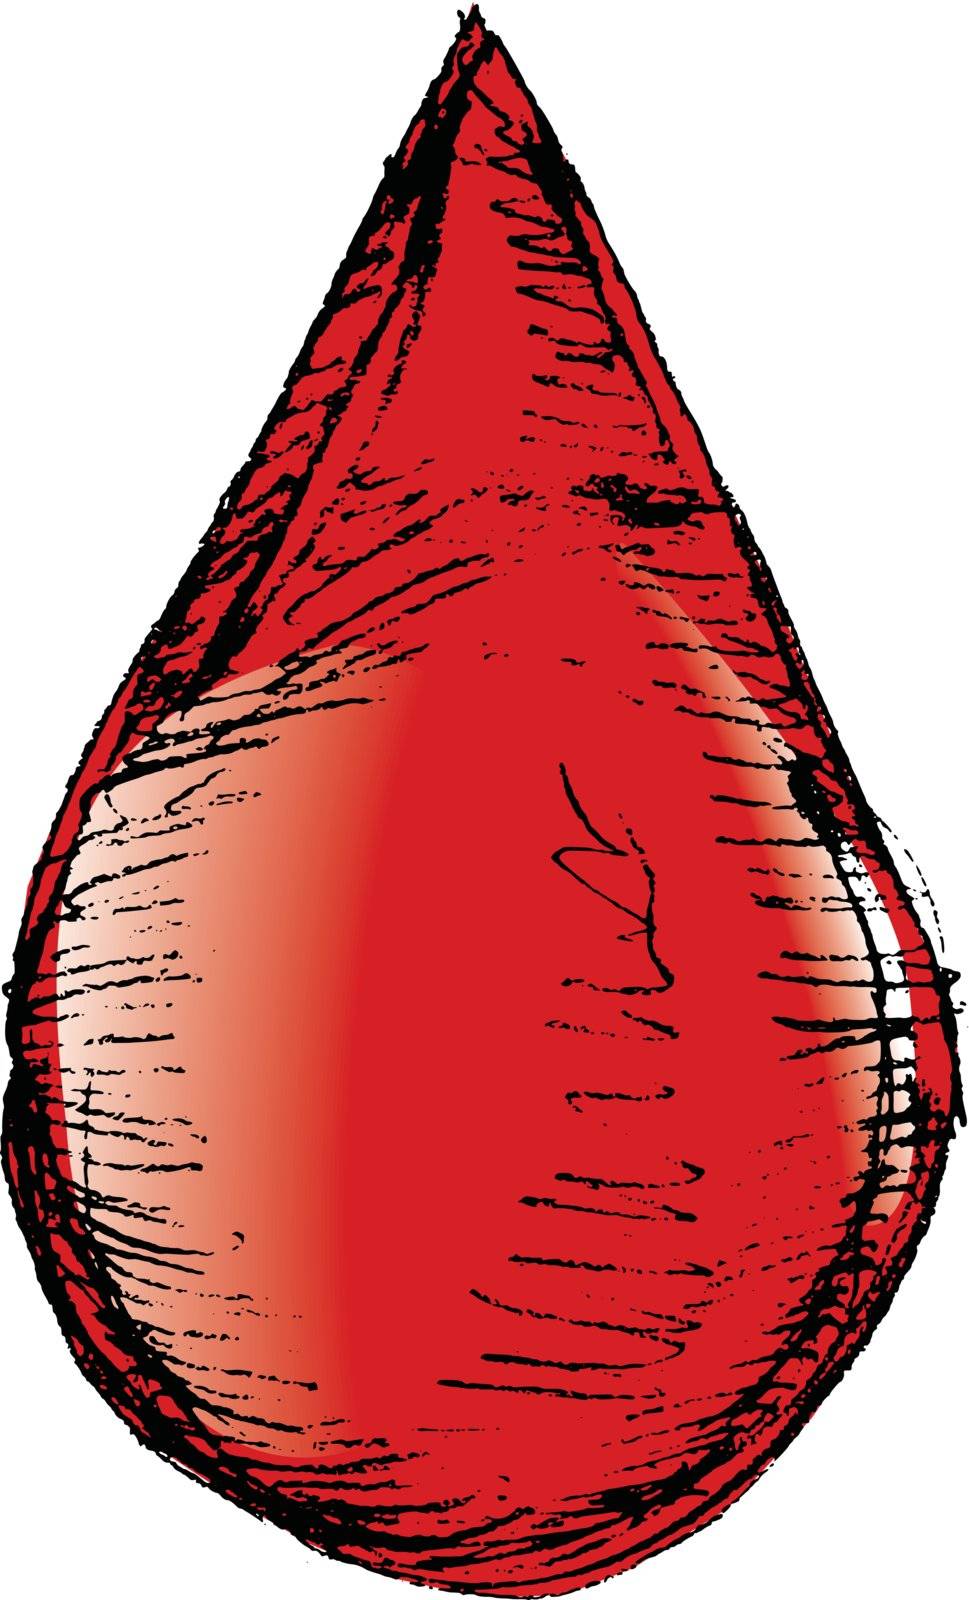 hand drawn, sketch illustration of drop of blood